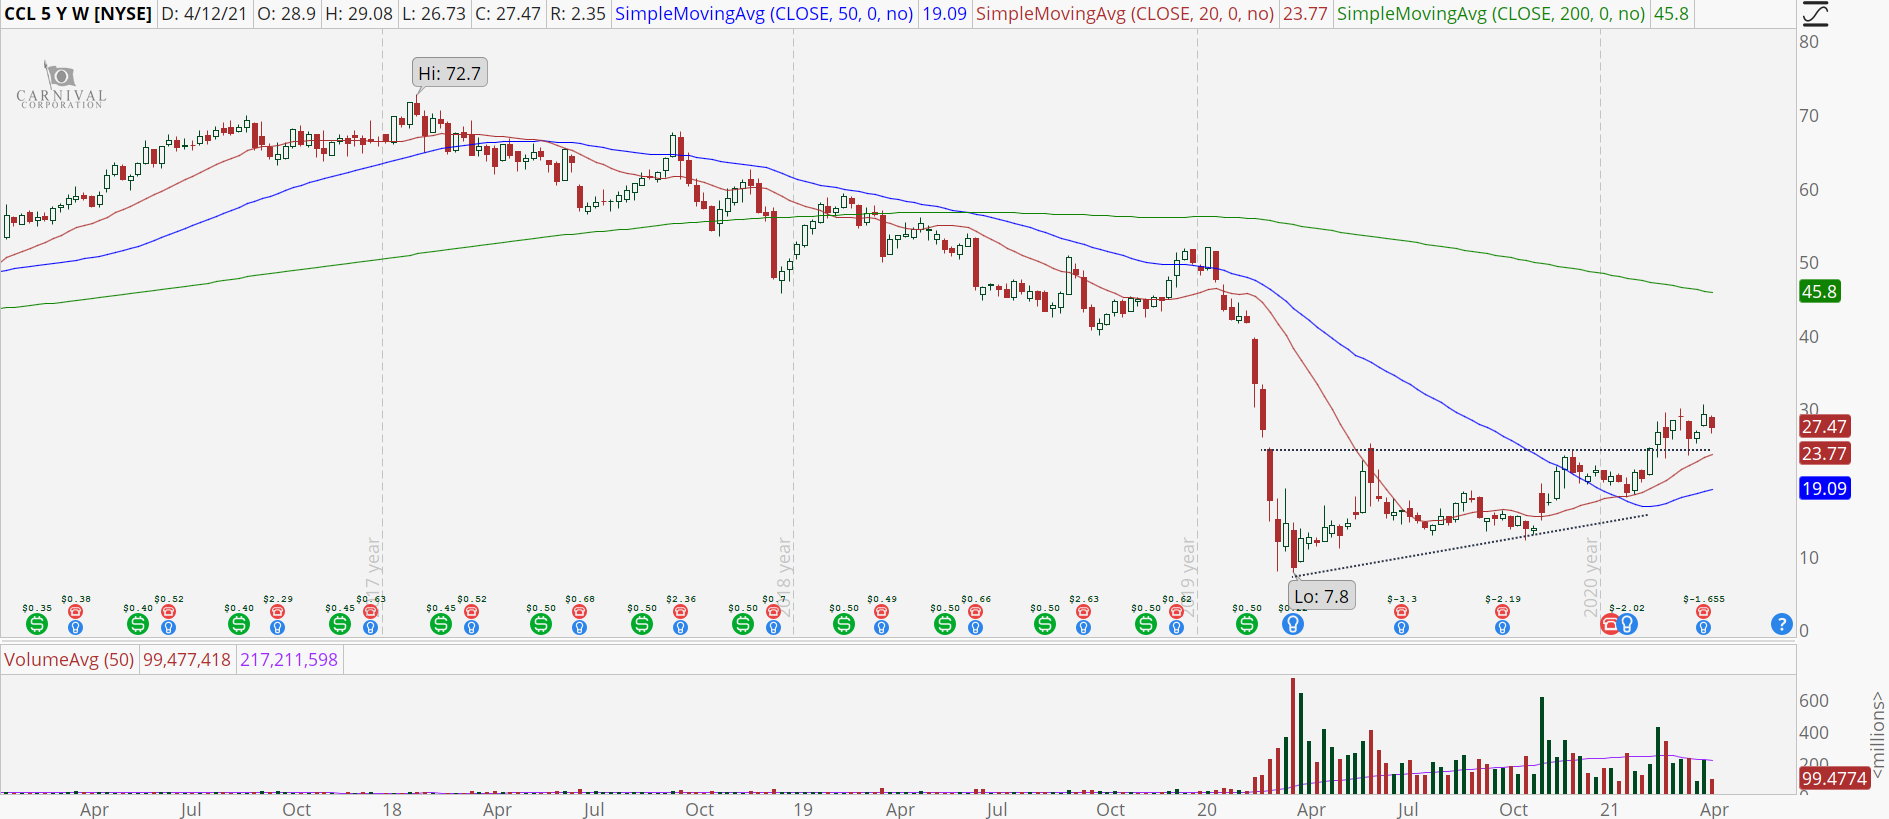 Carnival Corp (CCL) weekly stock chart with uptrend